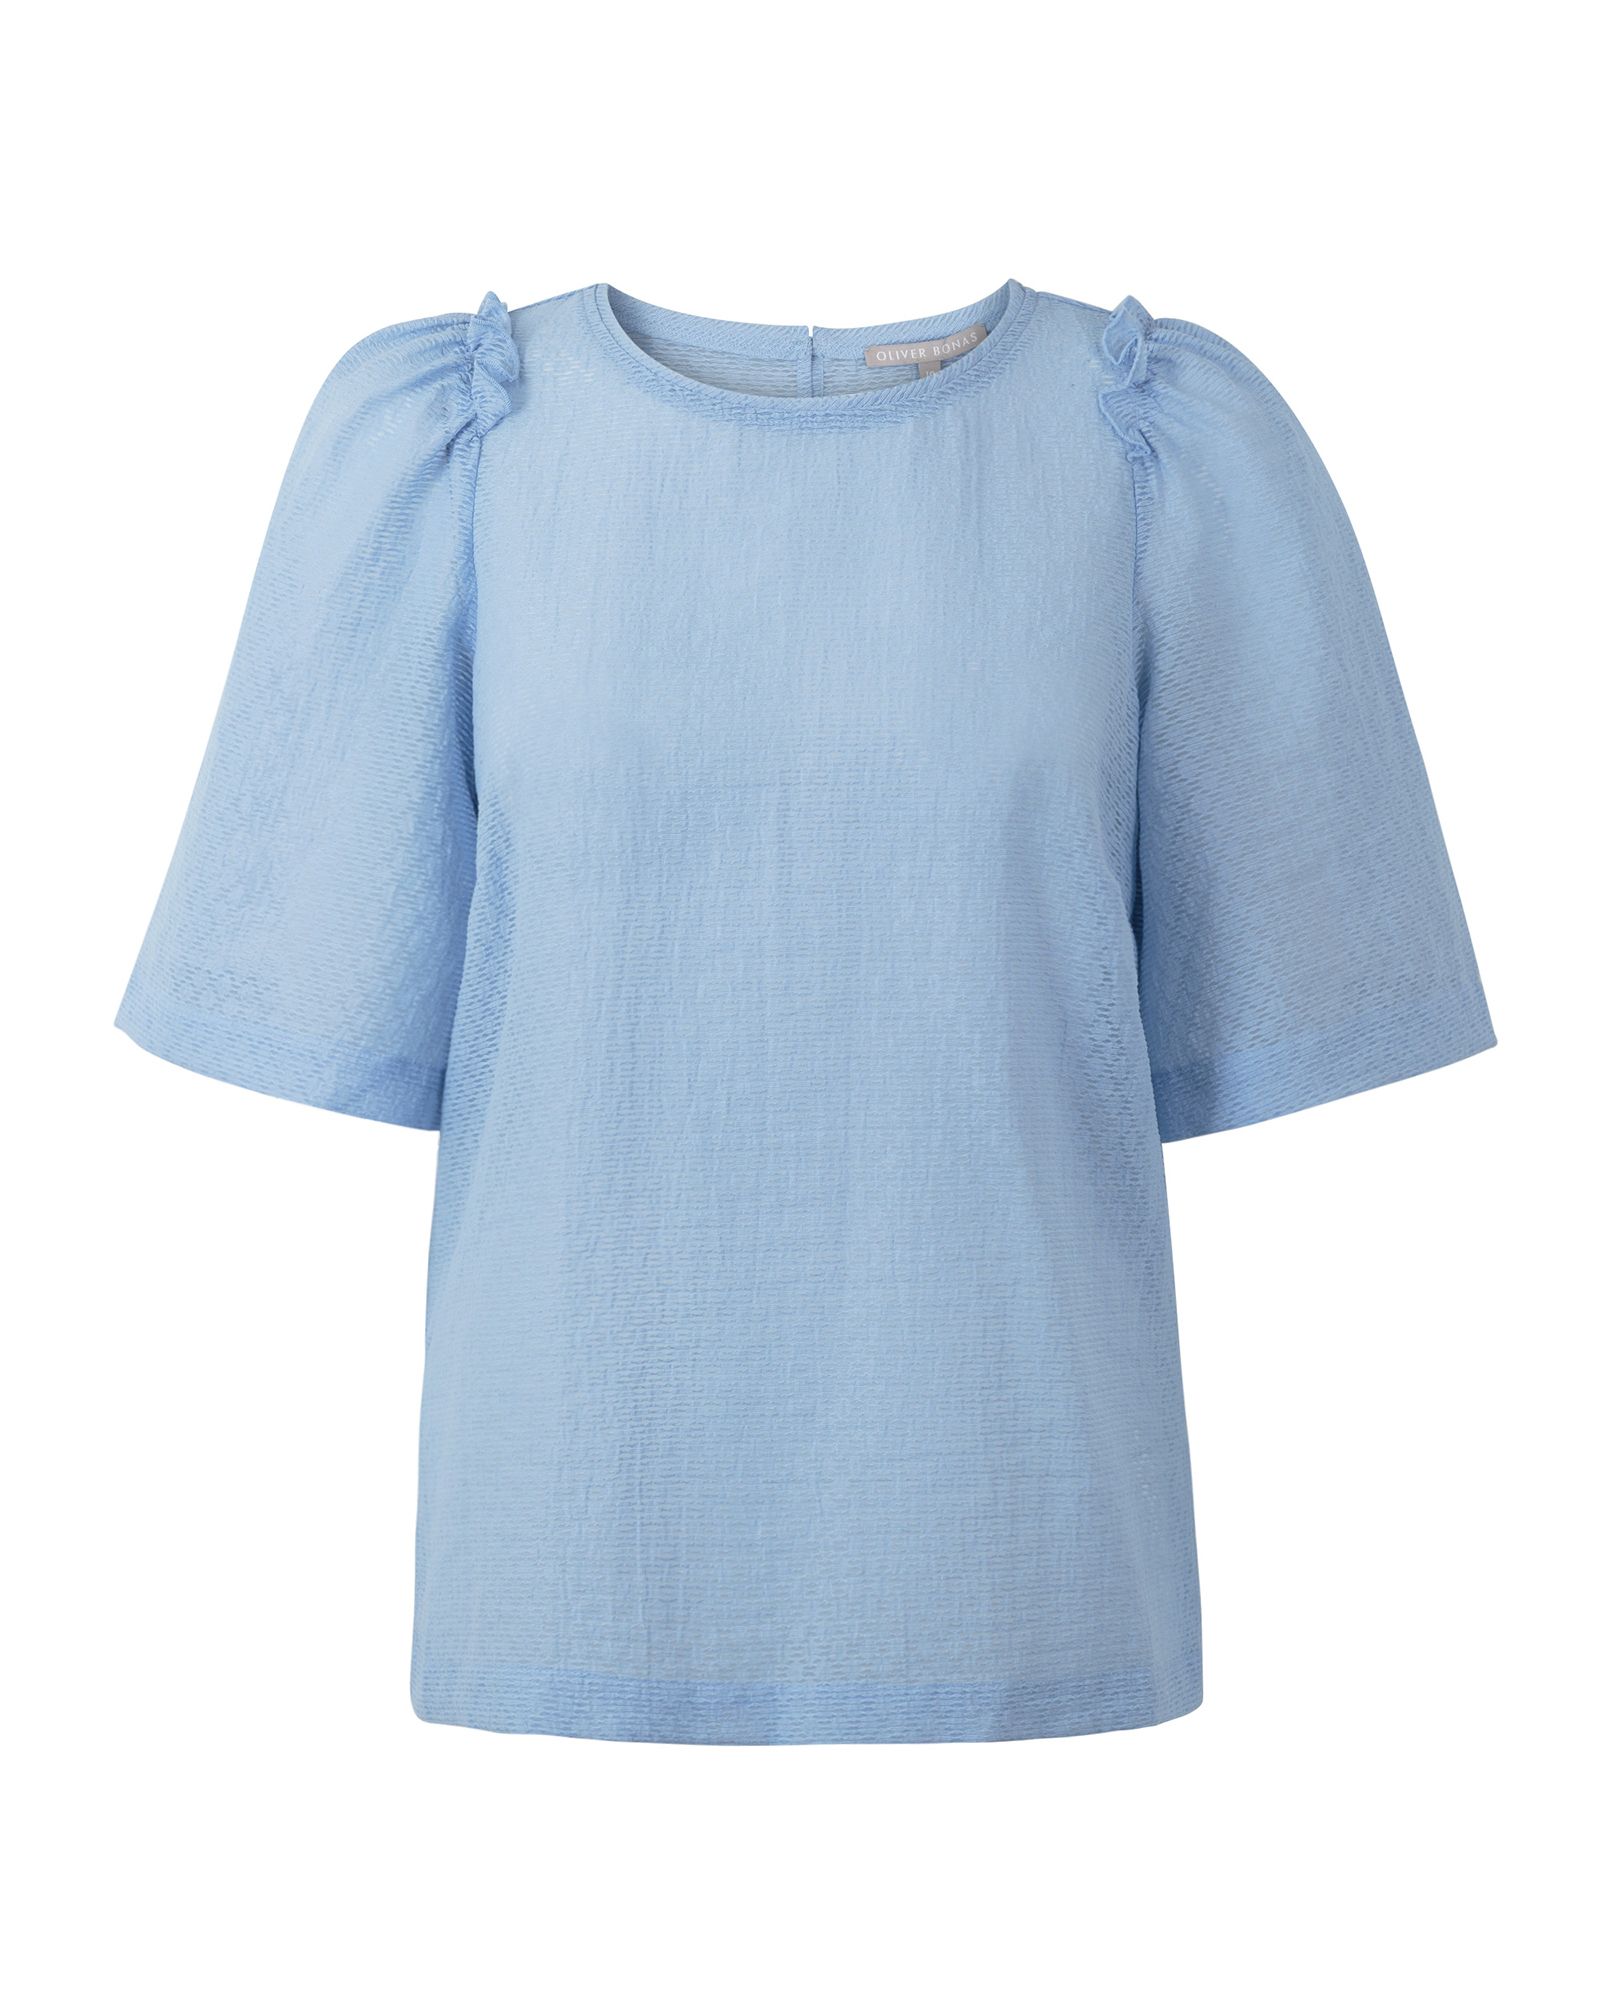 The Even Truth Blue Top | Oliver Bonas